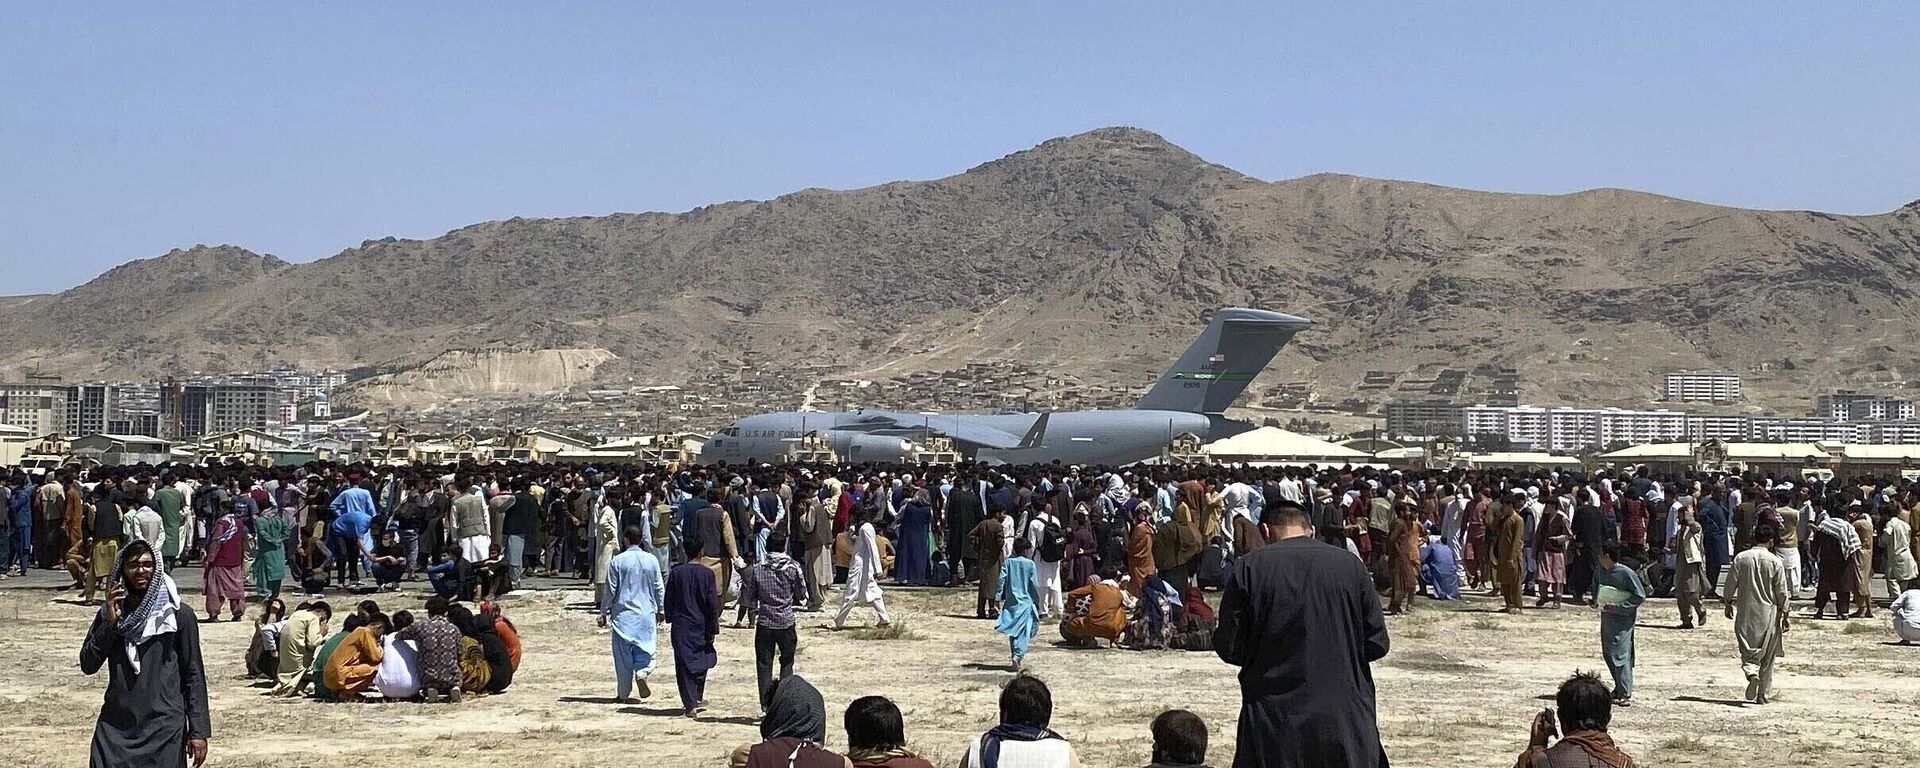  In this 16 August 2021 file photo, hundreds of people gather near a U.S. Air Force C-17 transport plane along the perimeter at the international airport in Kabul, Afghanistan after the Taliban takeover. - Sputnik International, 1920, 04.09.2021